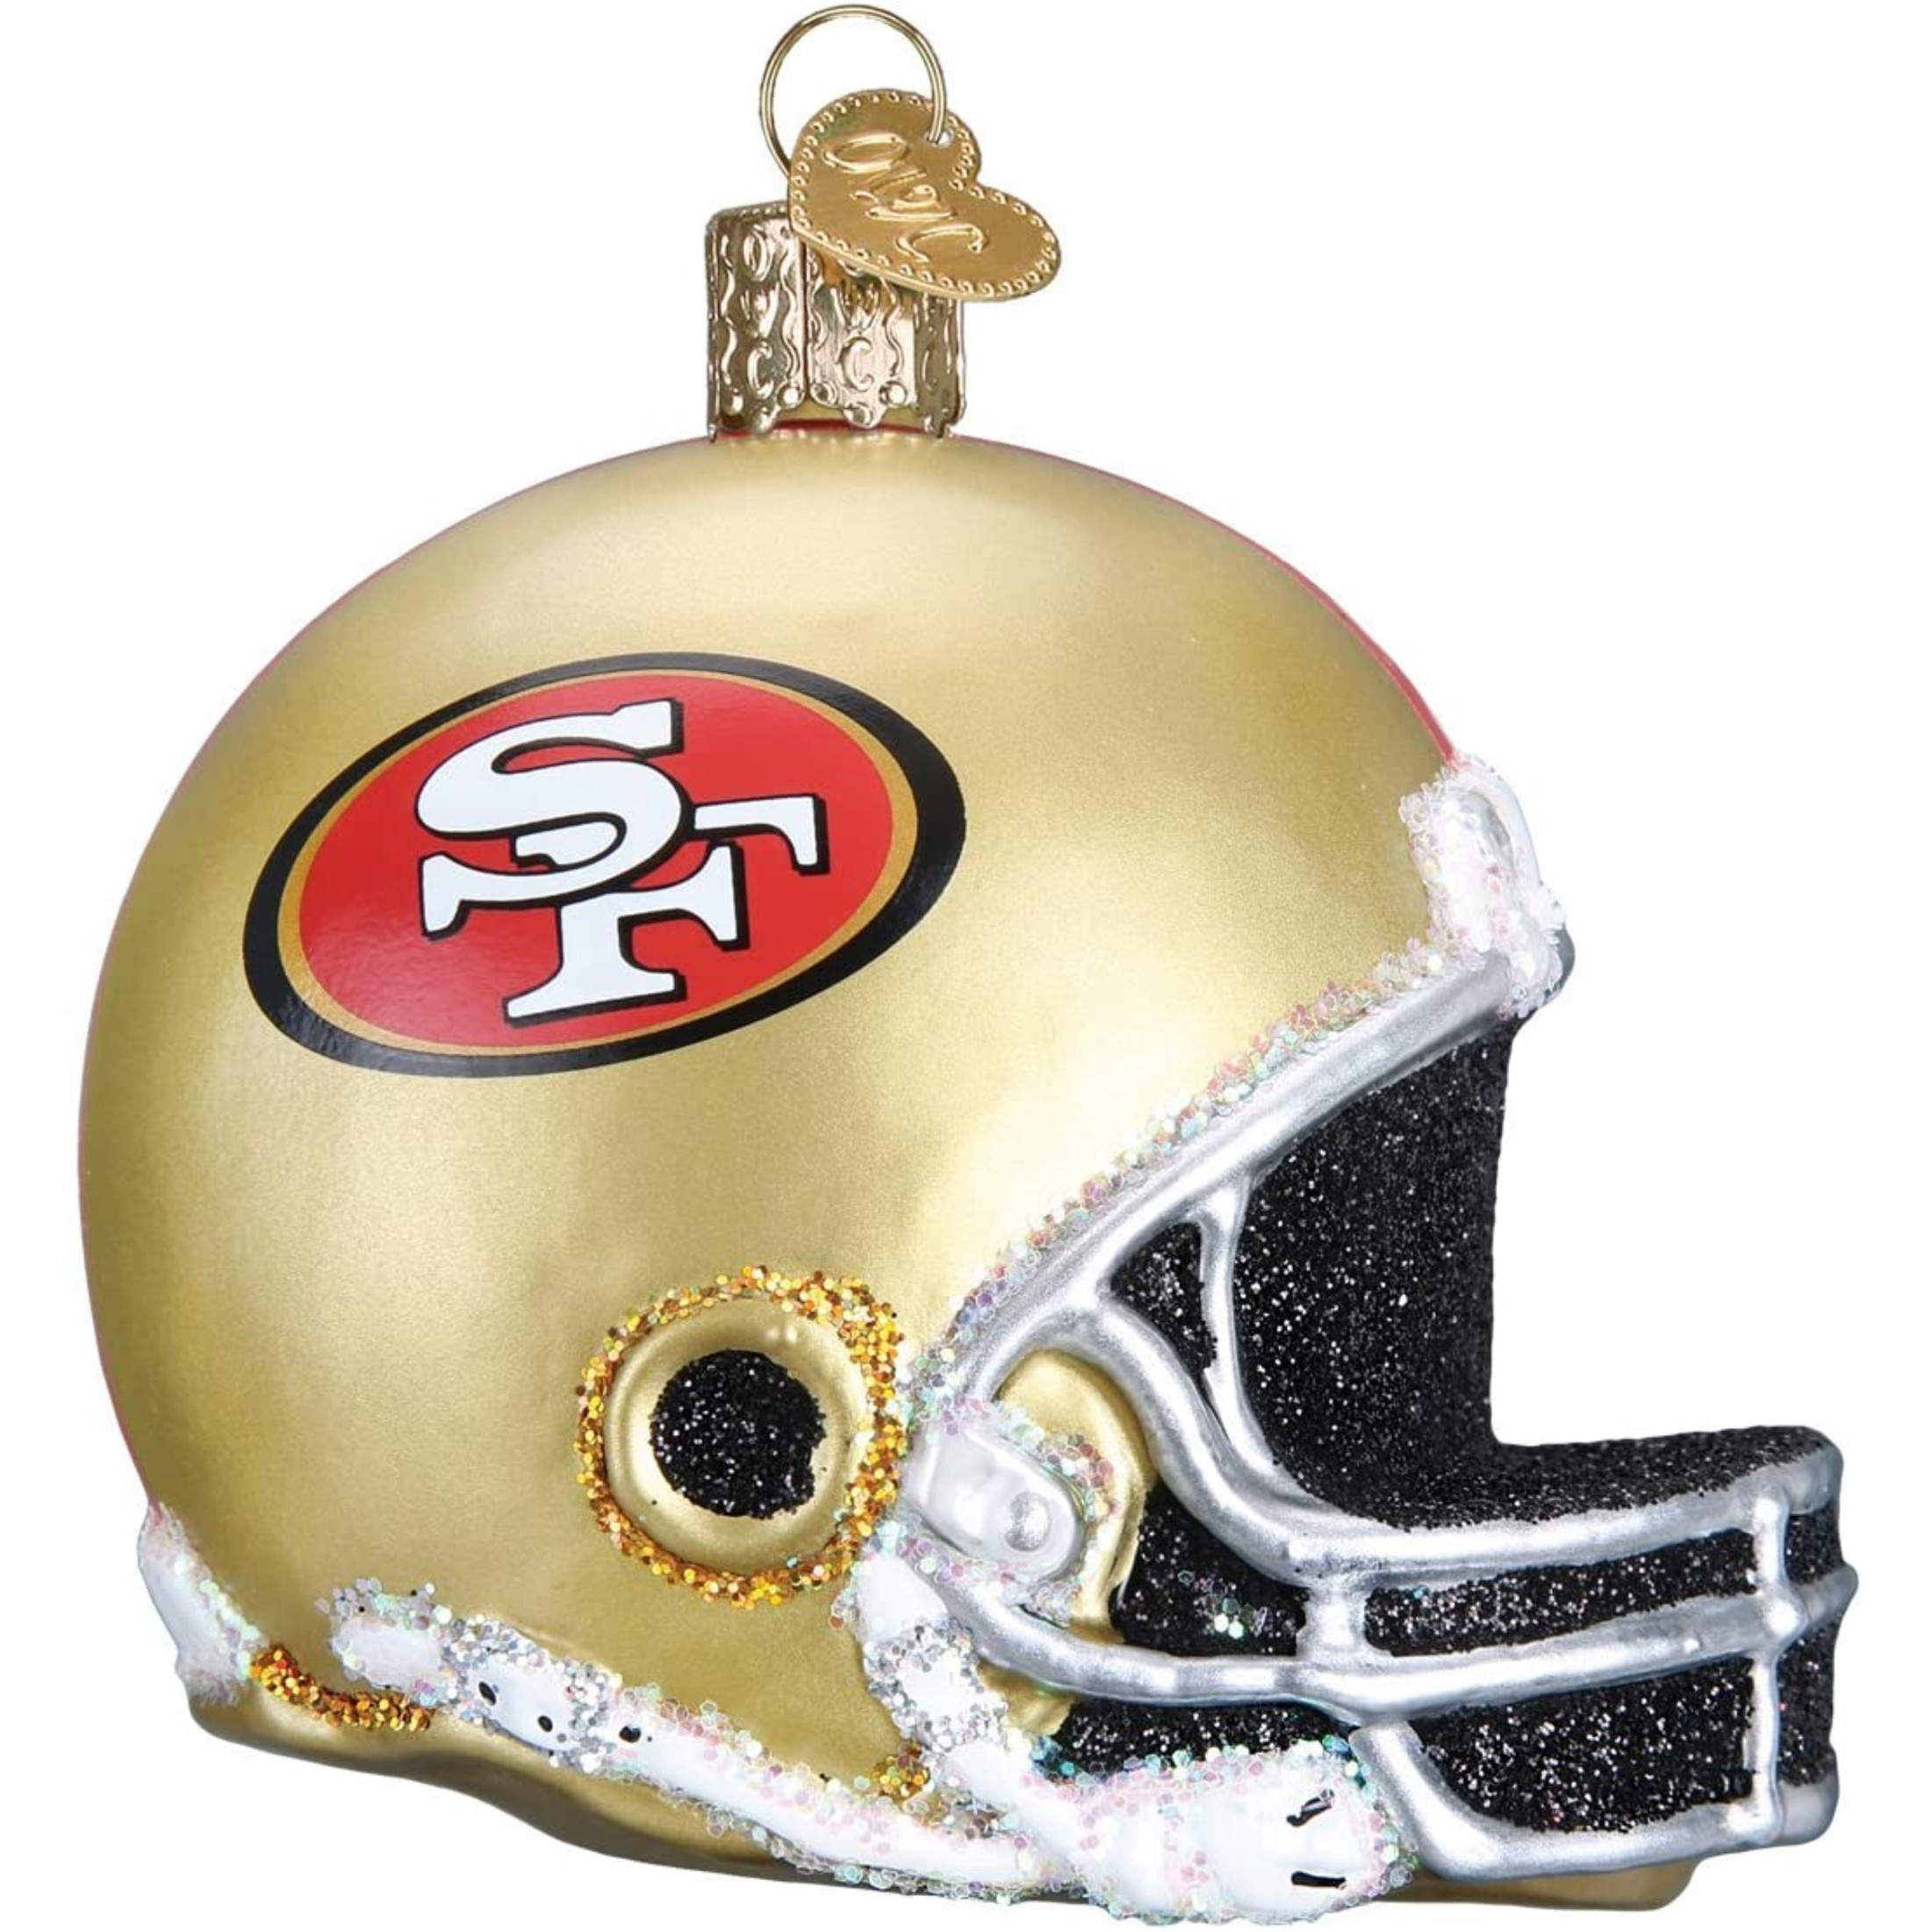 Old World Christmas Glass Blown Ornament, San Francisco 49ers Helmet (With OWC Gift Box)